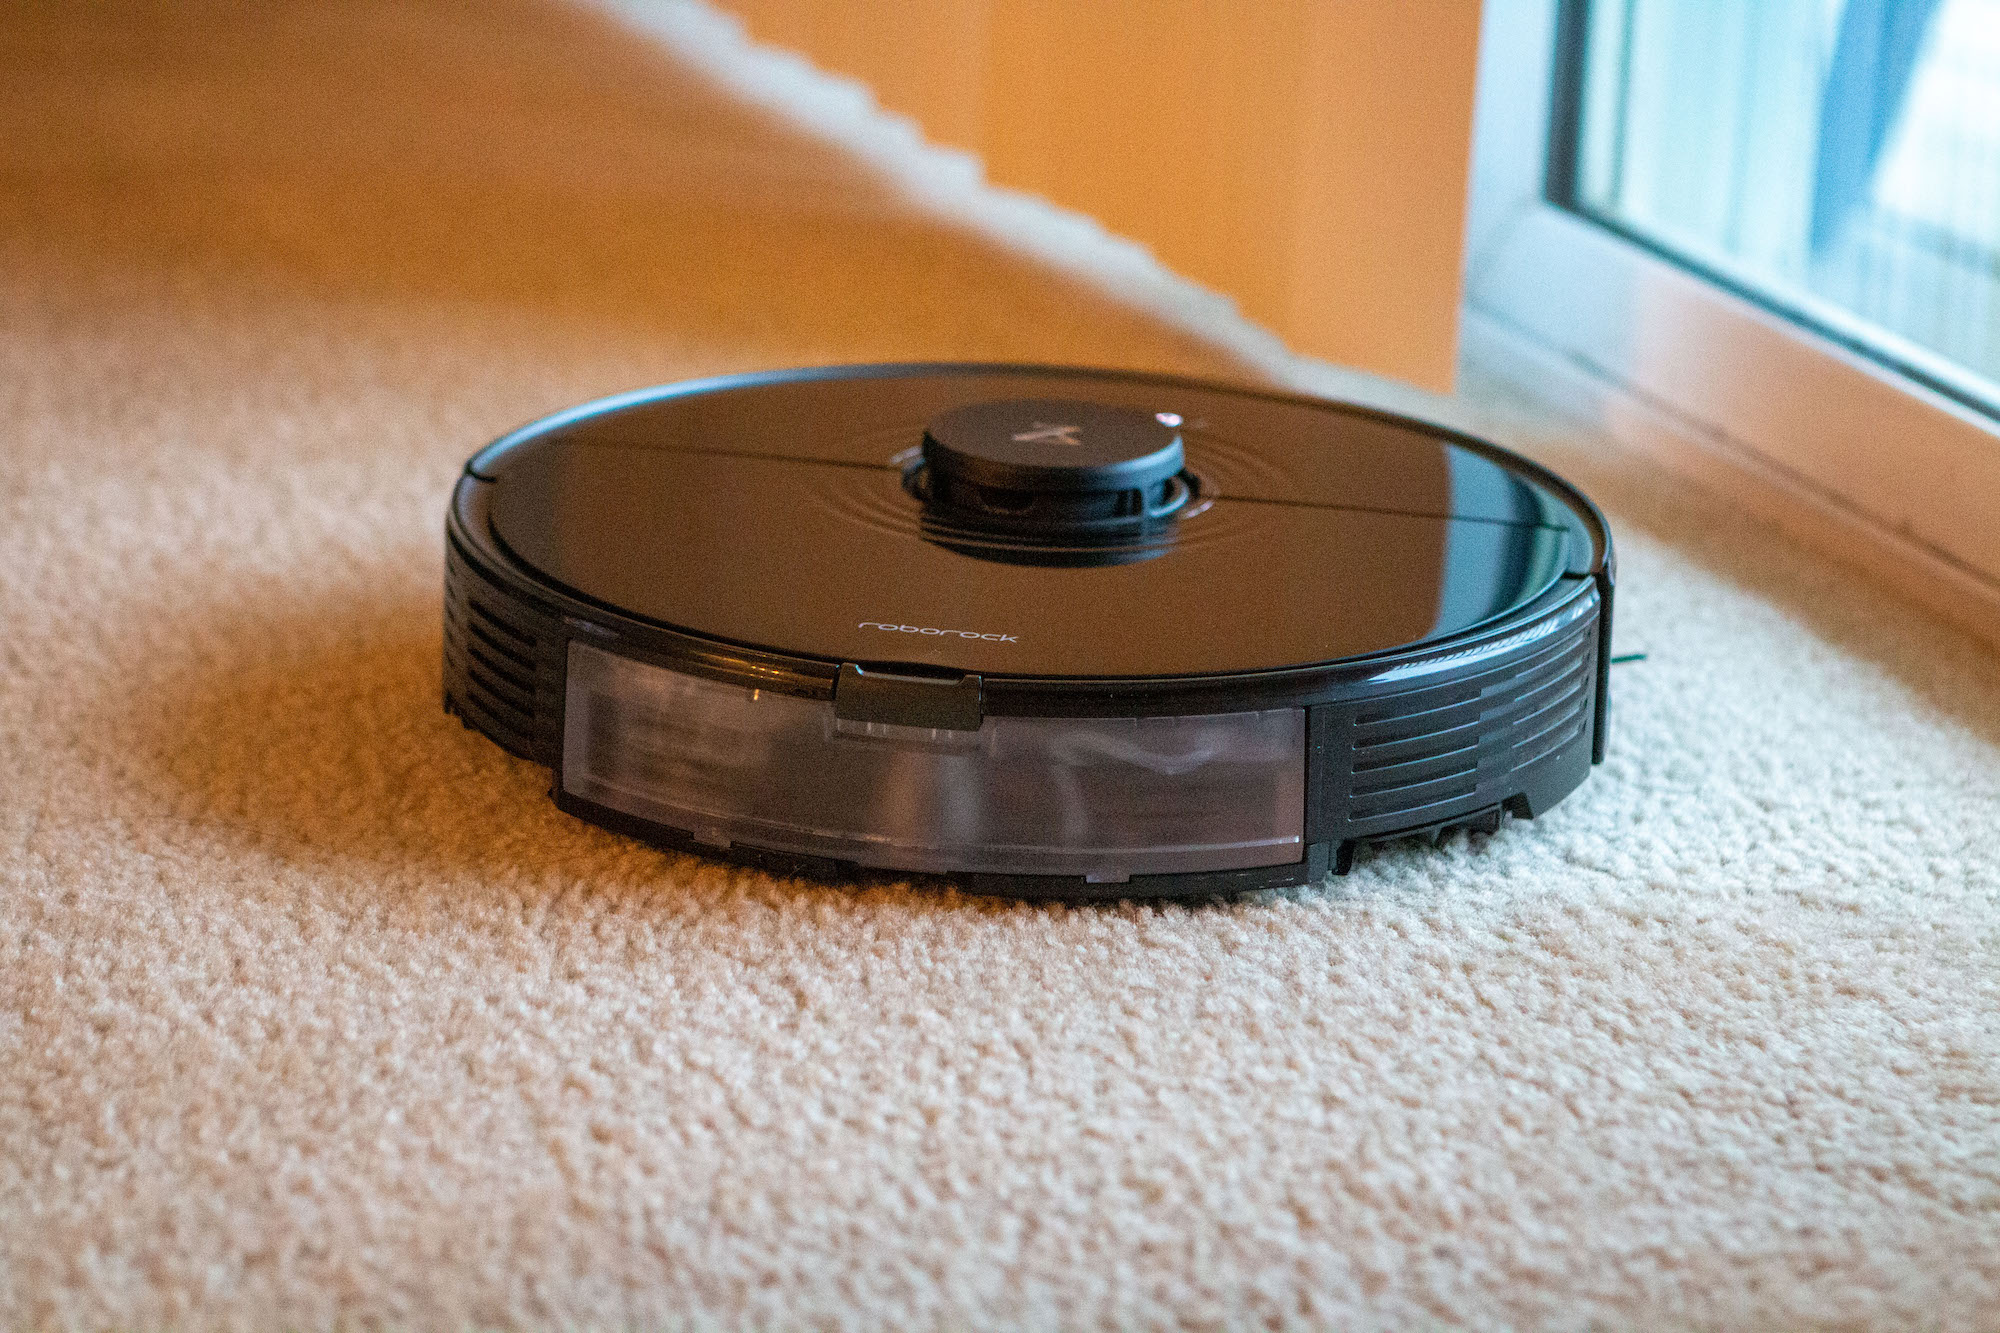 Roborock S7 Review: time to let the robots do the cleaning - Phandroid